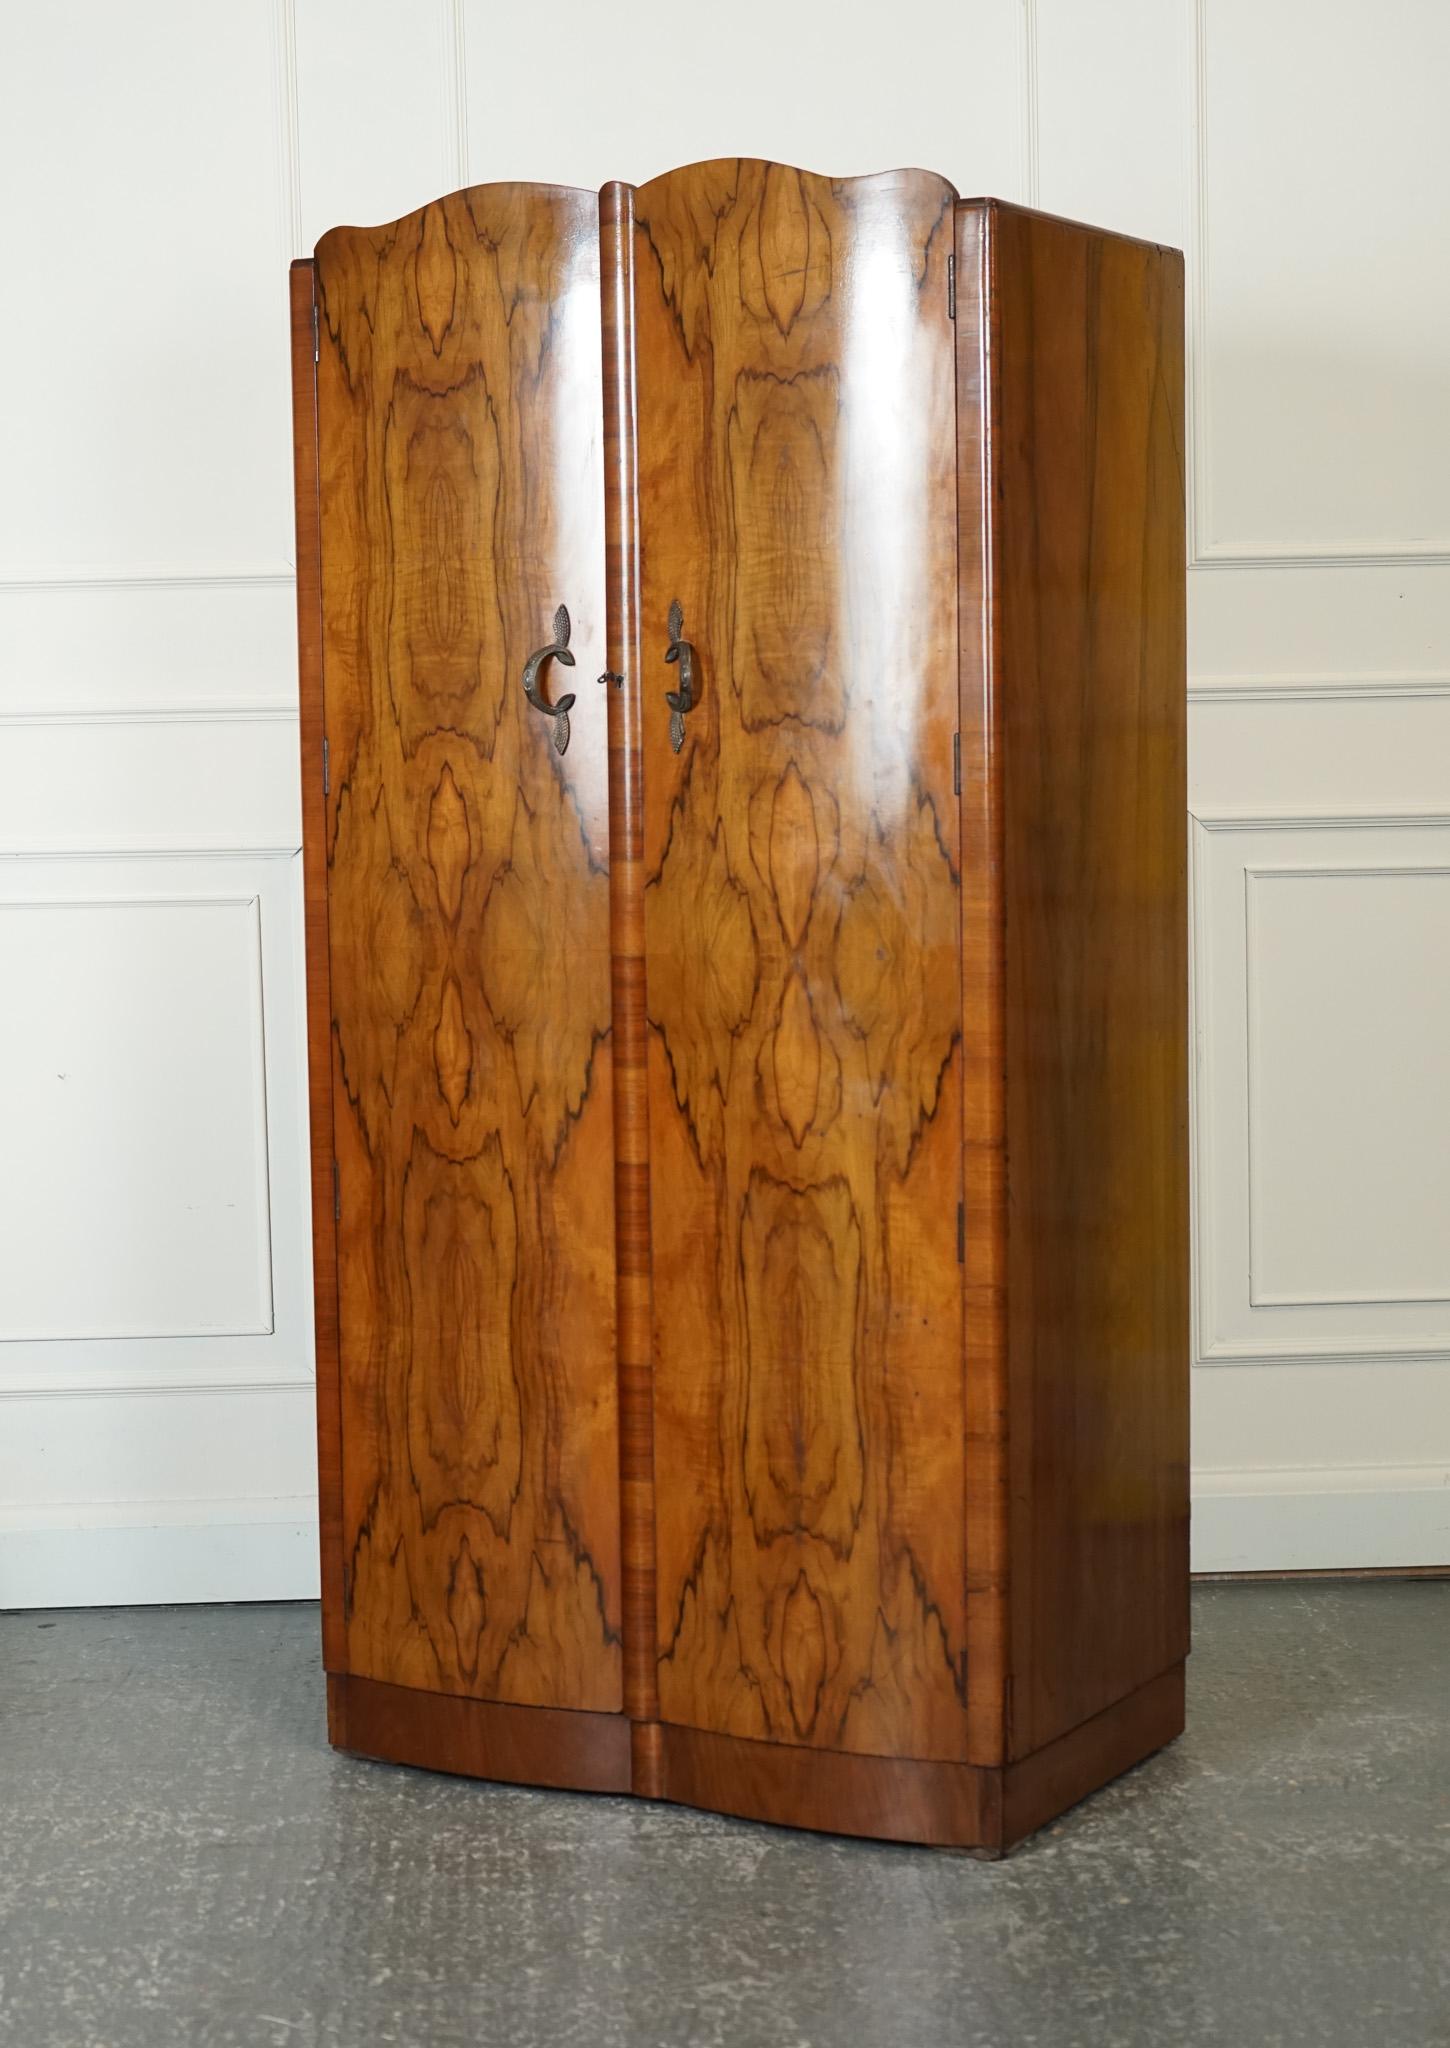 Antiques of London



We are delighted to offer for sale this 1920s Large Art Deco Burr Walnut Double Wardrobe.

A stunning example of 1920's Art Deco design, this large burr walnut double wardrobe exudes elegance and sophistication. The use of